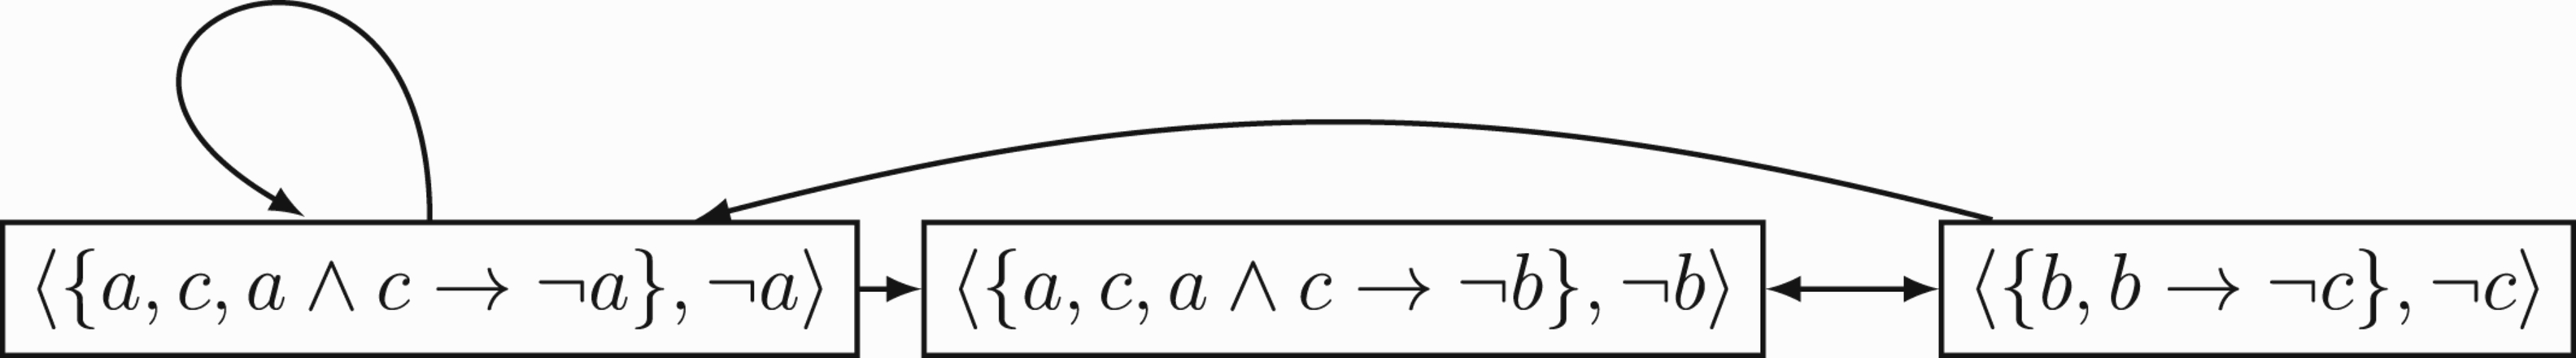 An exhaustive simple logic argument graph where Δ={a, b, c, a ∧ c→≠g a, b→≠g c, a ∧ c→≠g b}. Note that this exhaustive graph contains a self-cycle and an odd length cycle.